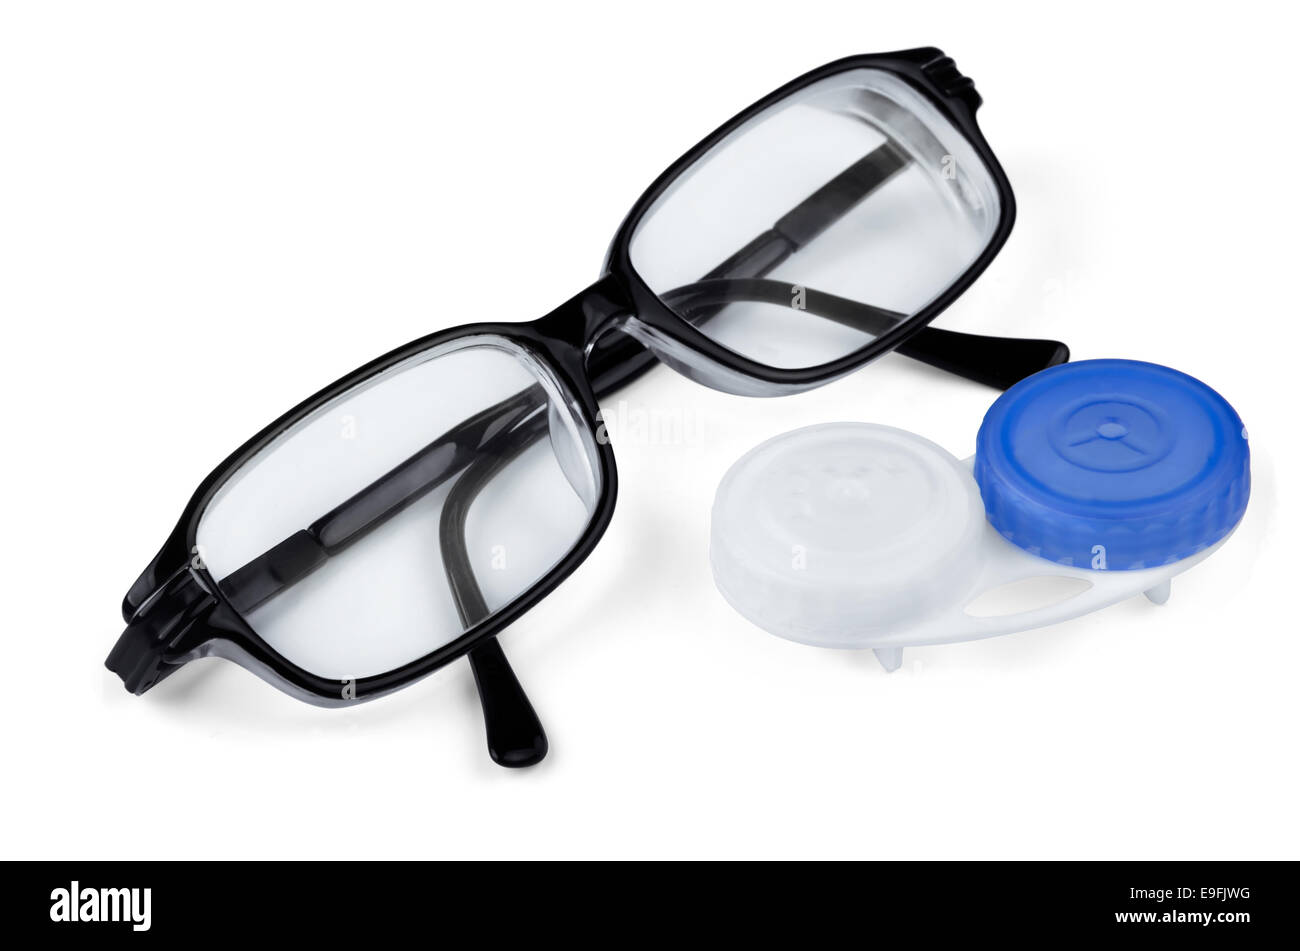 Contact lenses and glasses Stock Photo